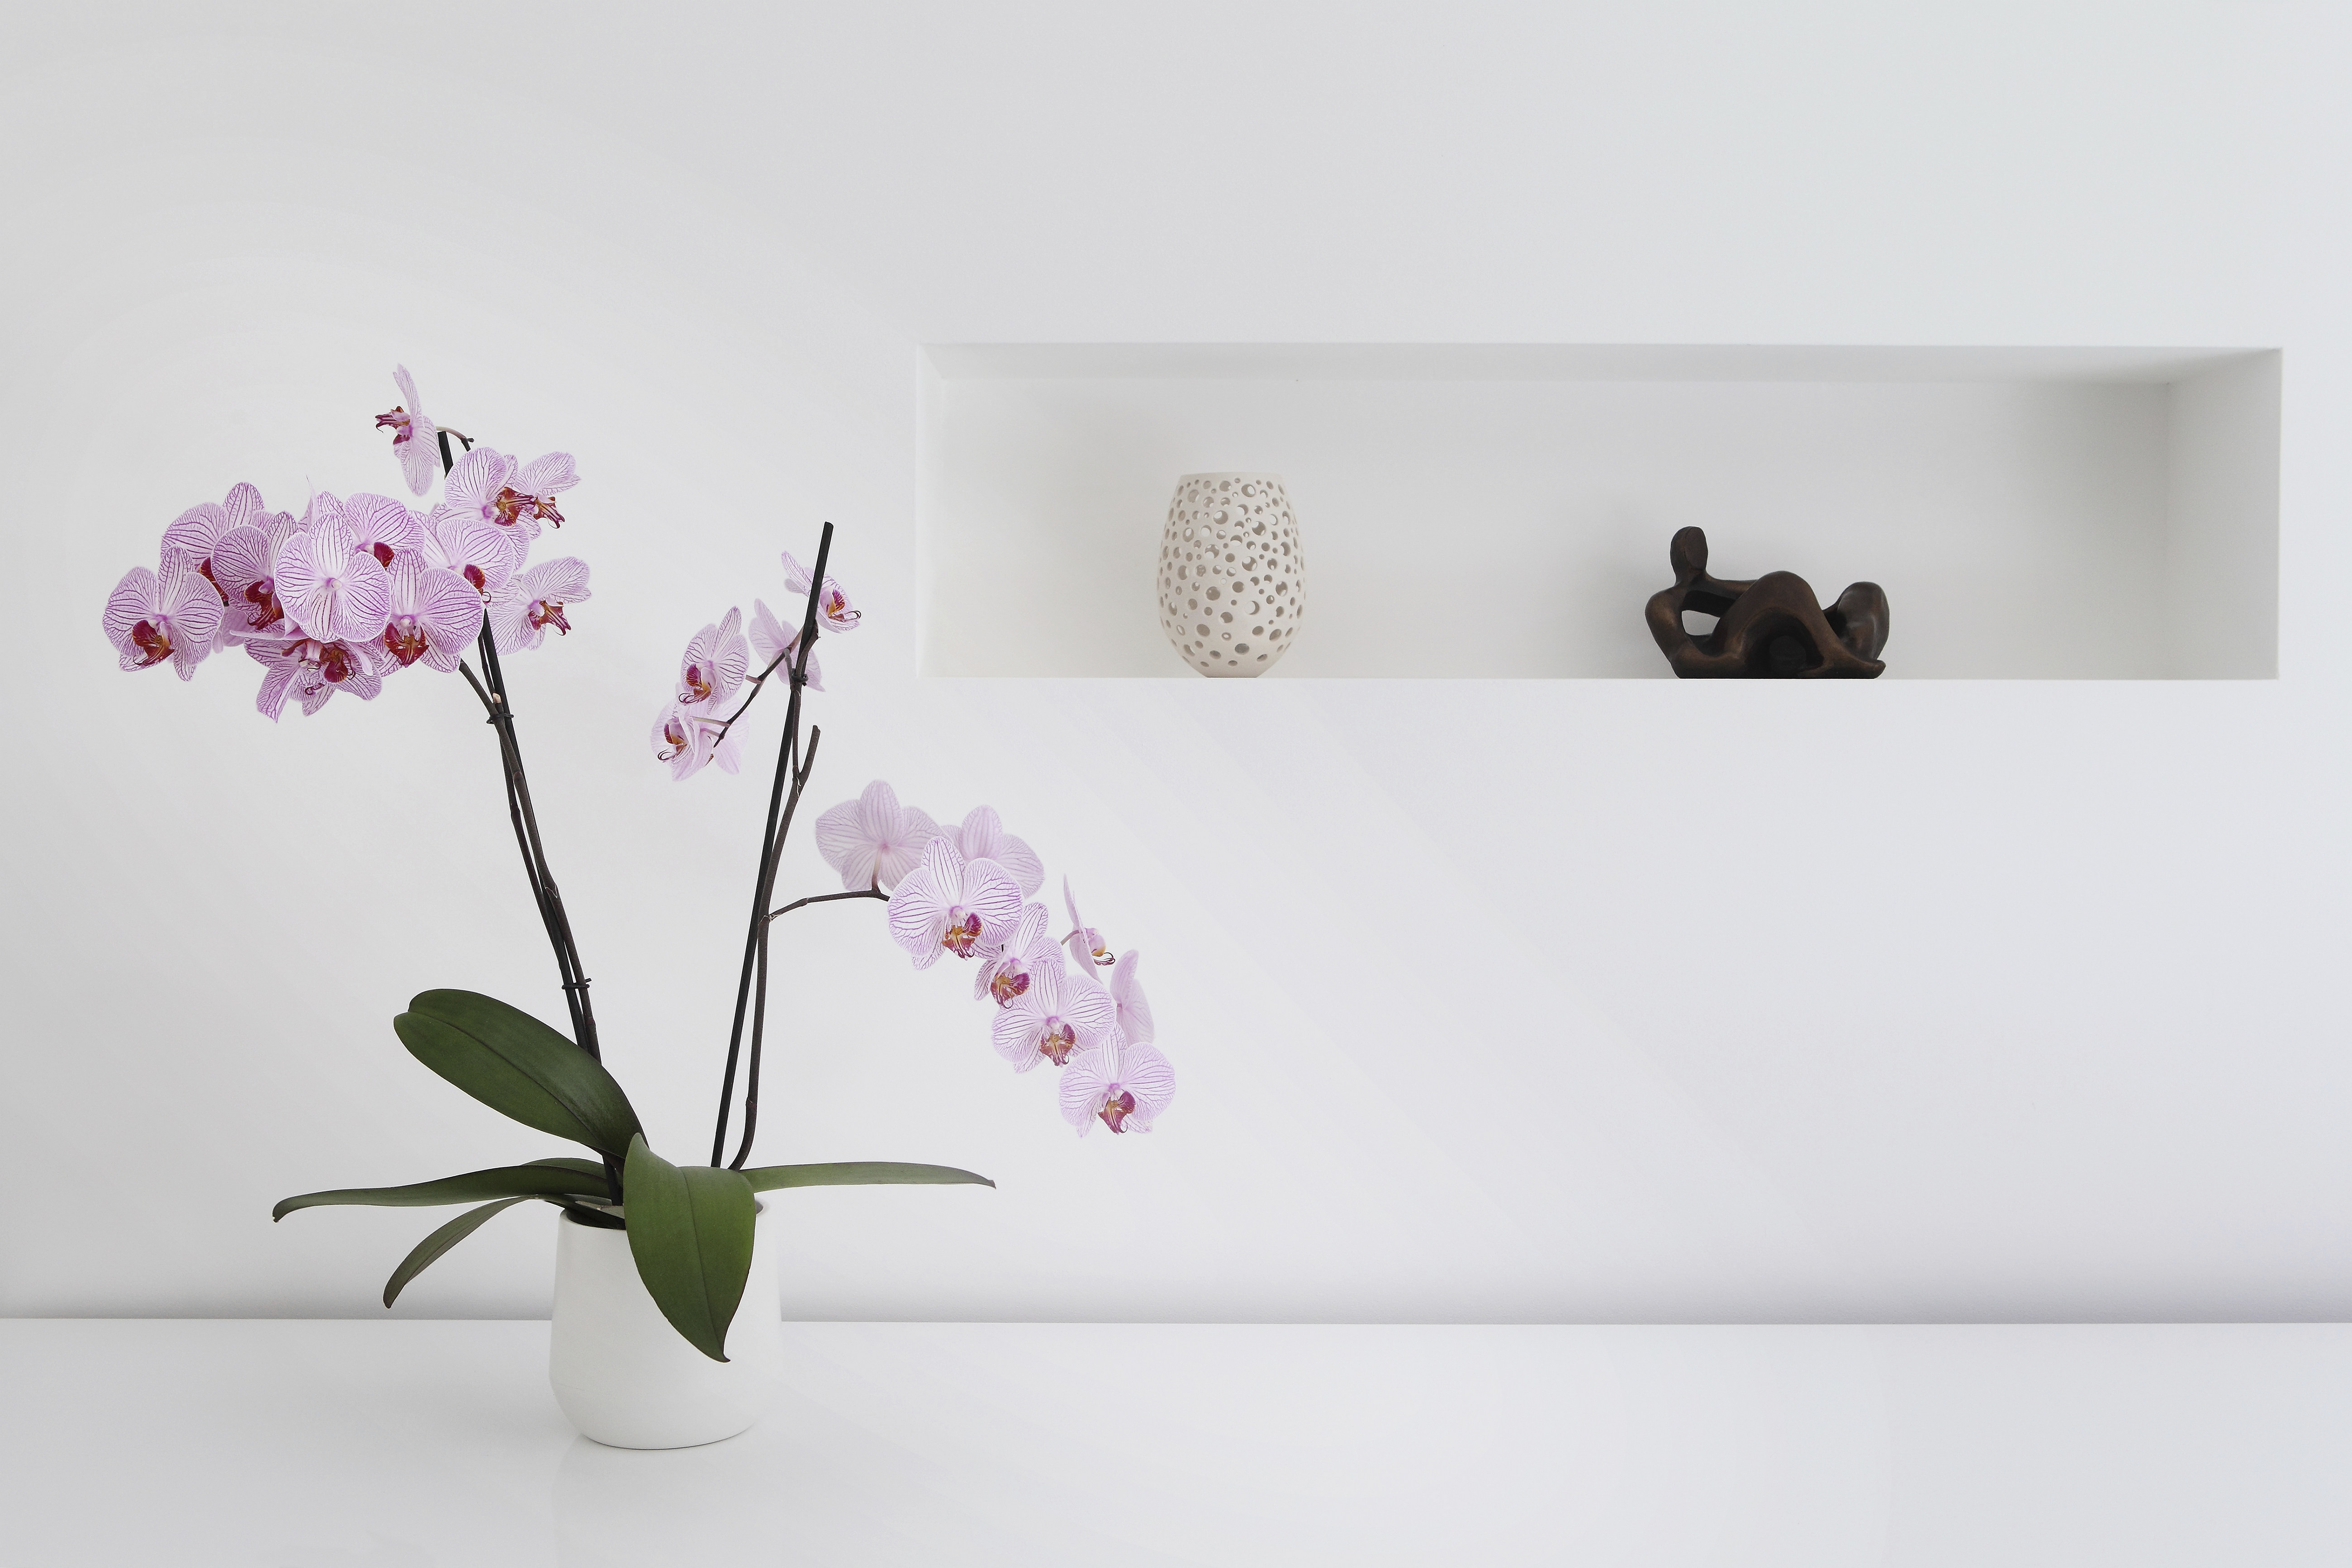 Pink orchid plant and ornaments in room | Source: Getty Images